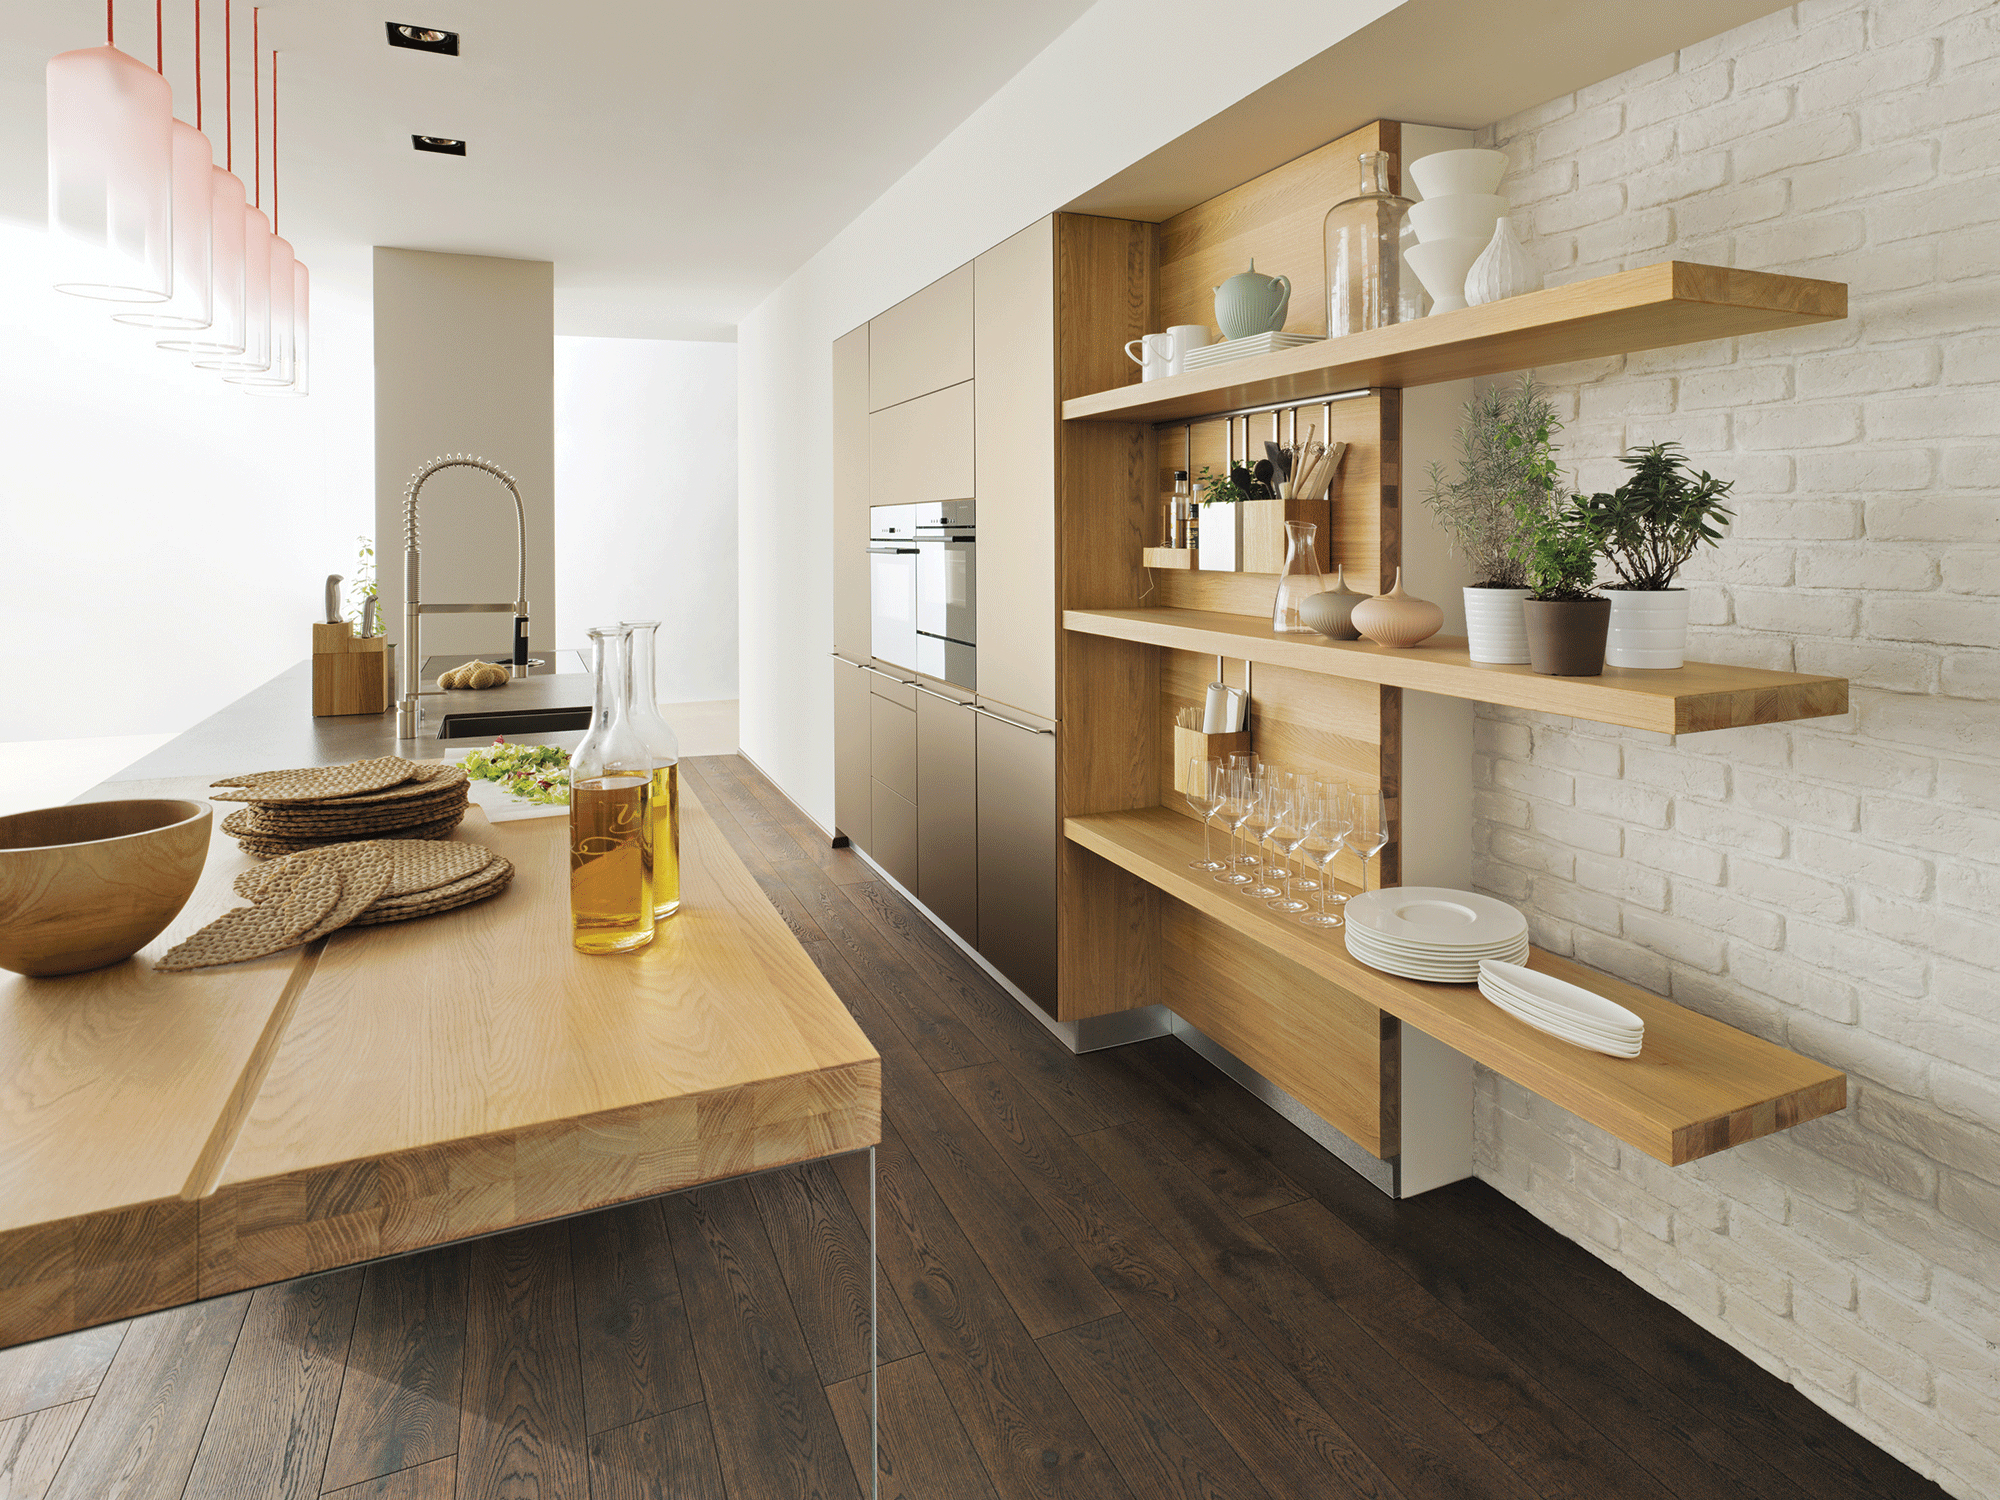 Vao and Linee kitchen by Team 7